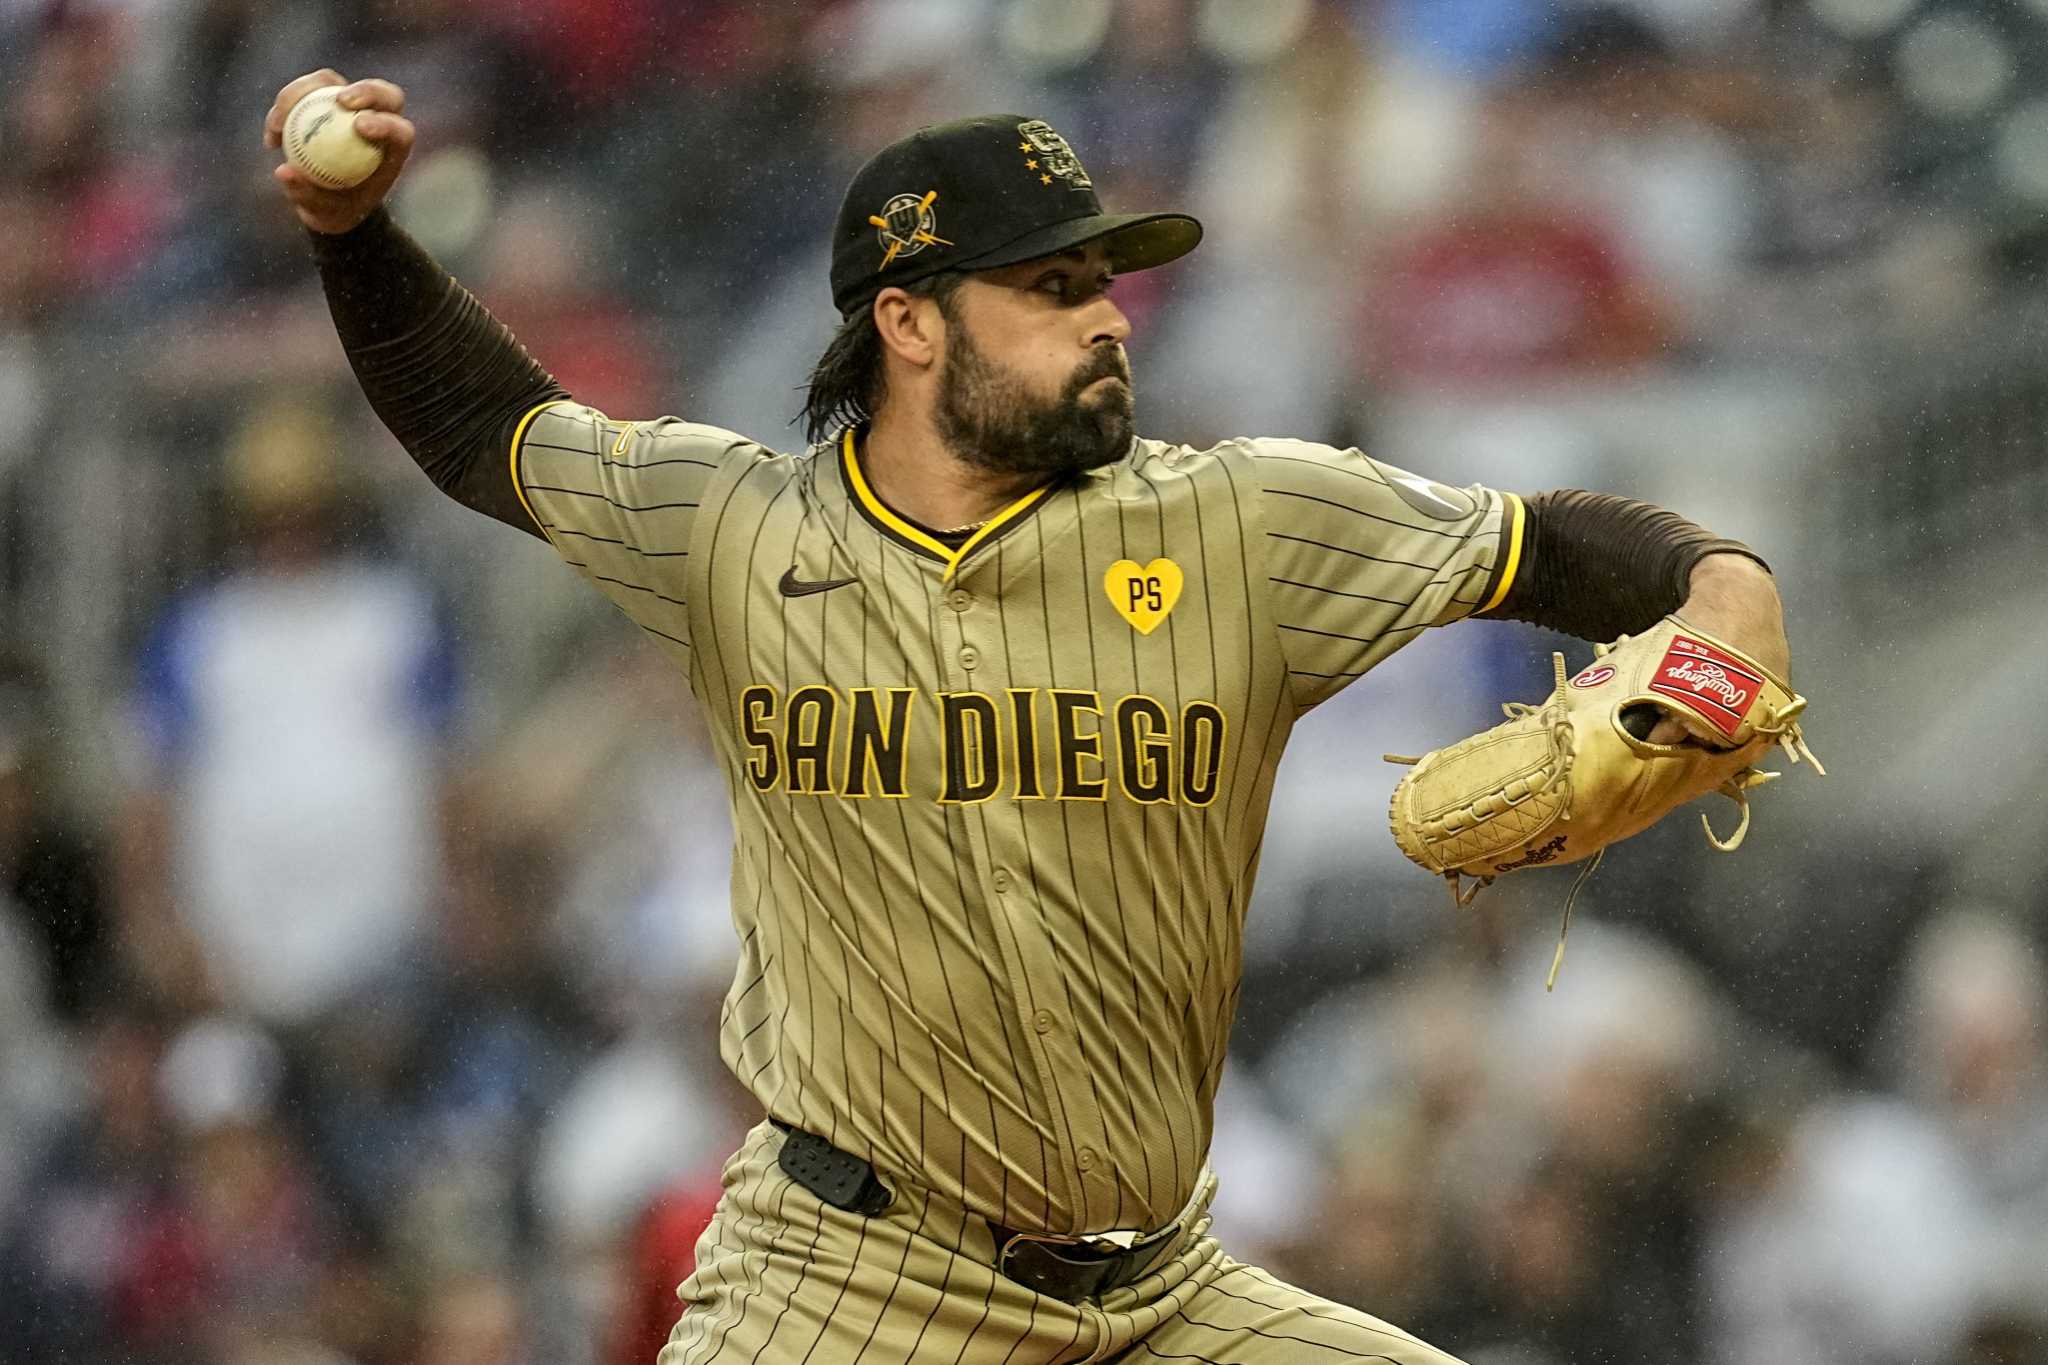 Matt Waldron strikes out 10 as Padres silence Braves' bats in 3-1 win